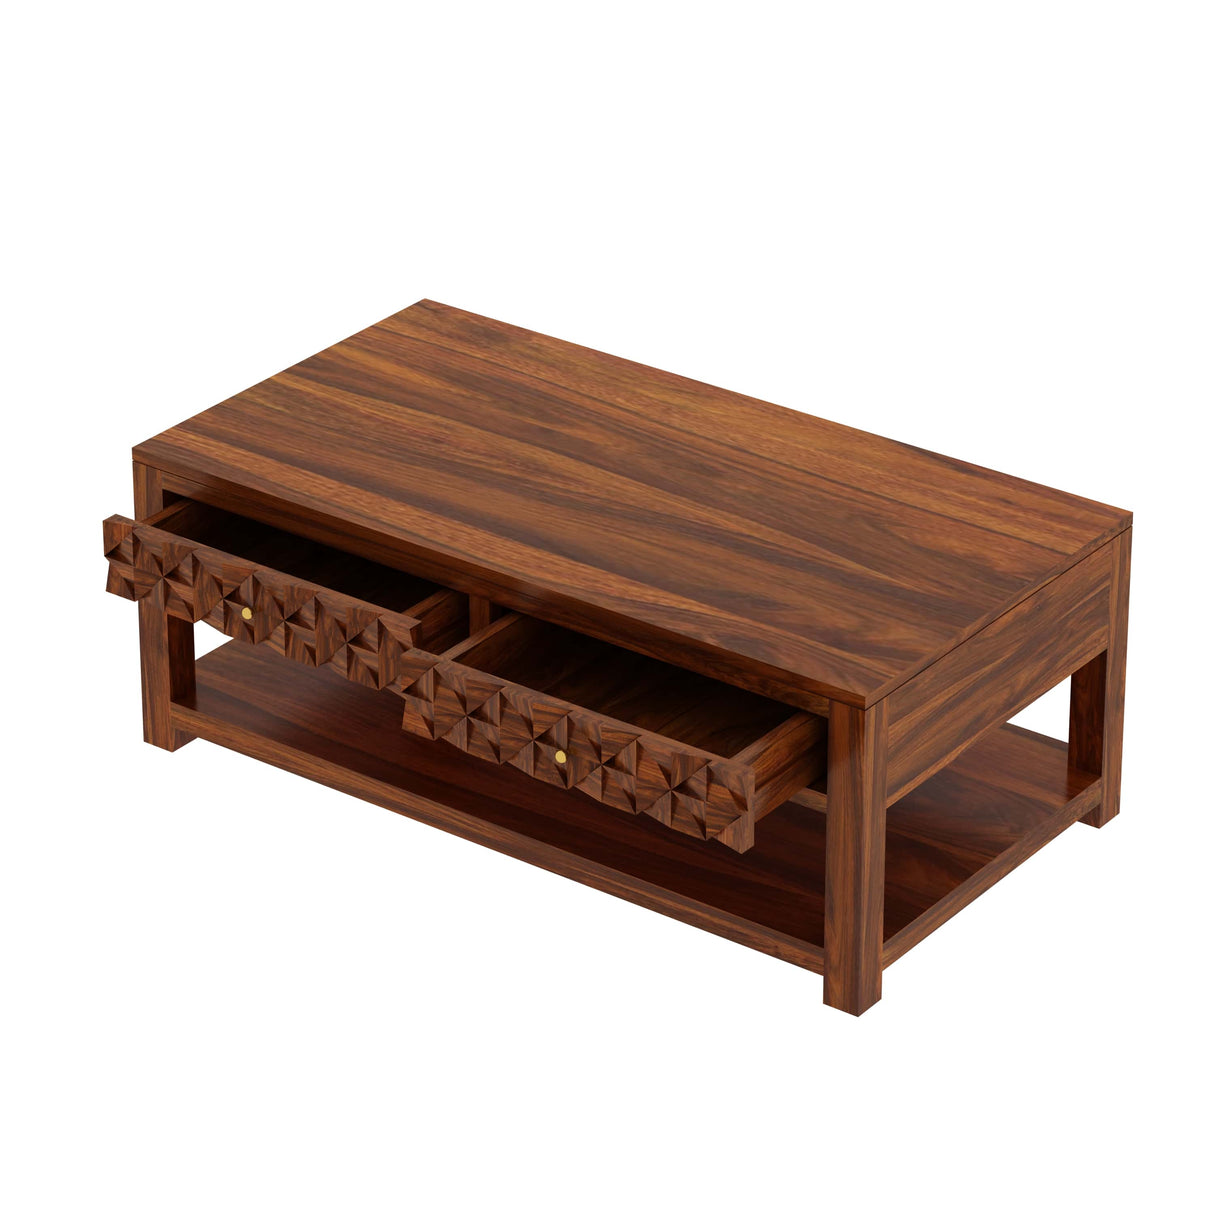 Raj Solid Wood Coffee Table With Two Drawer Storage - 1 Year Warranty